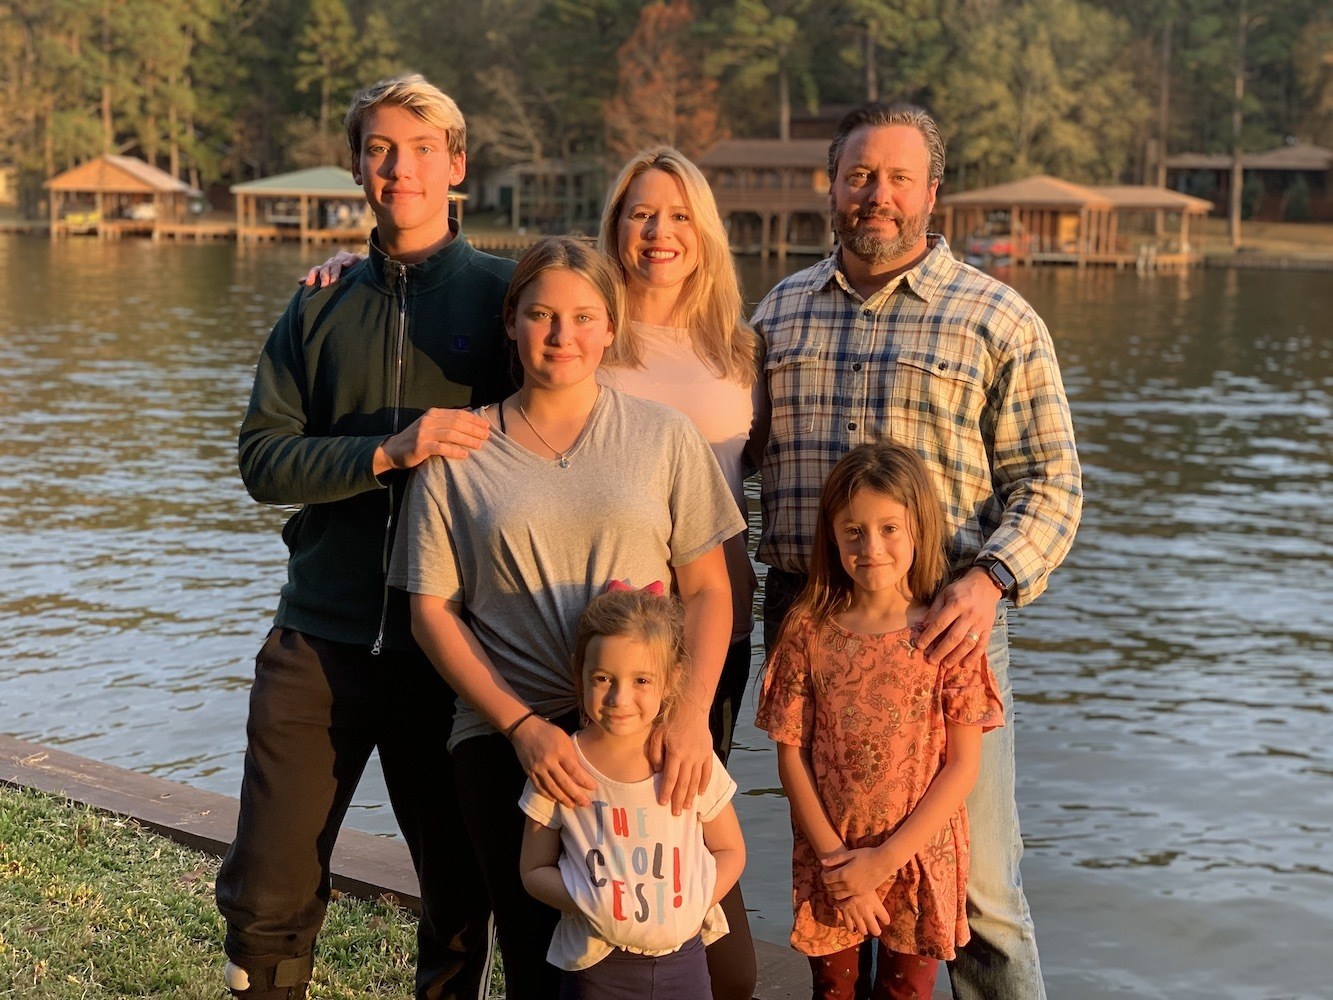 Jason and his family in front of a lake